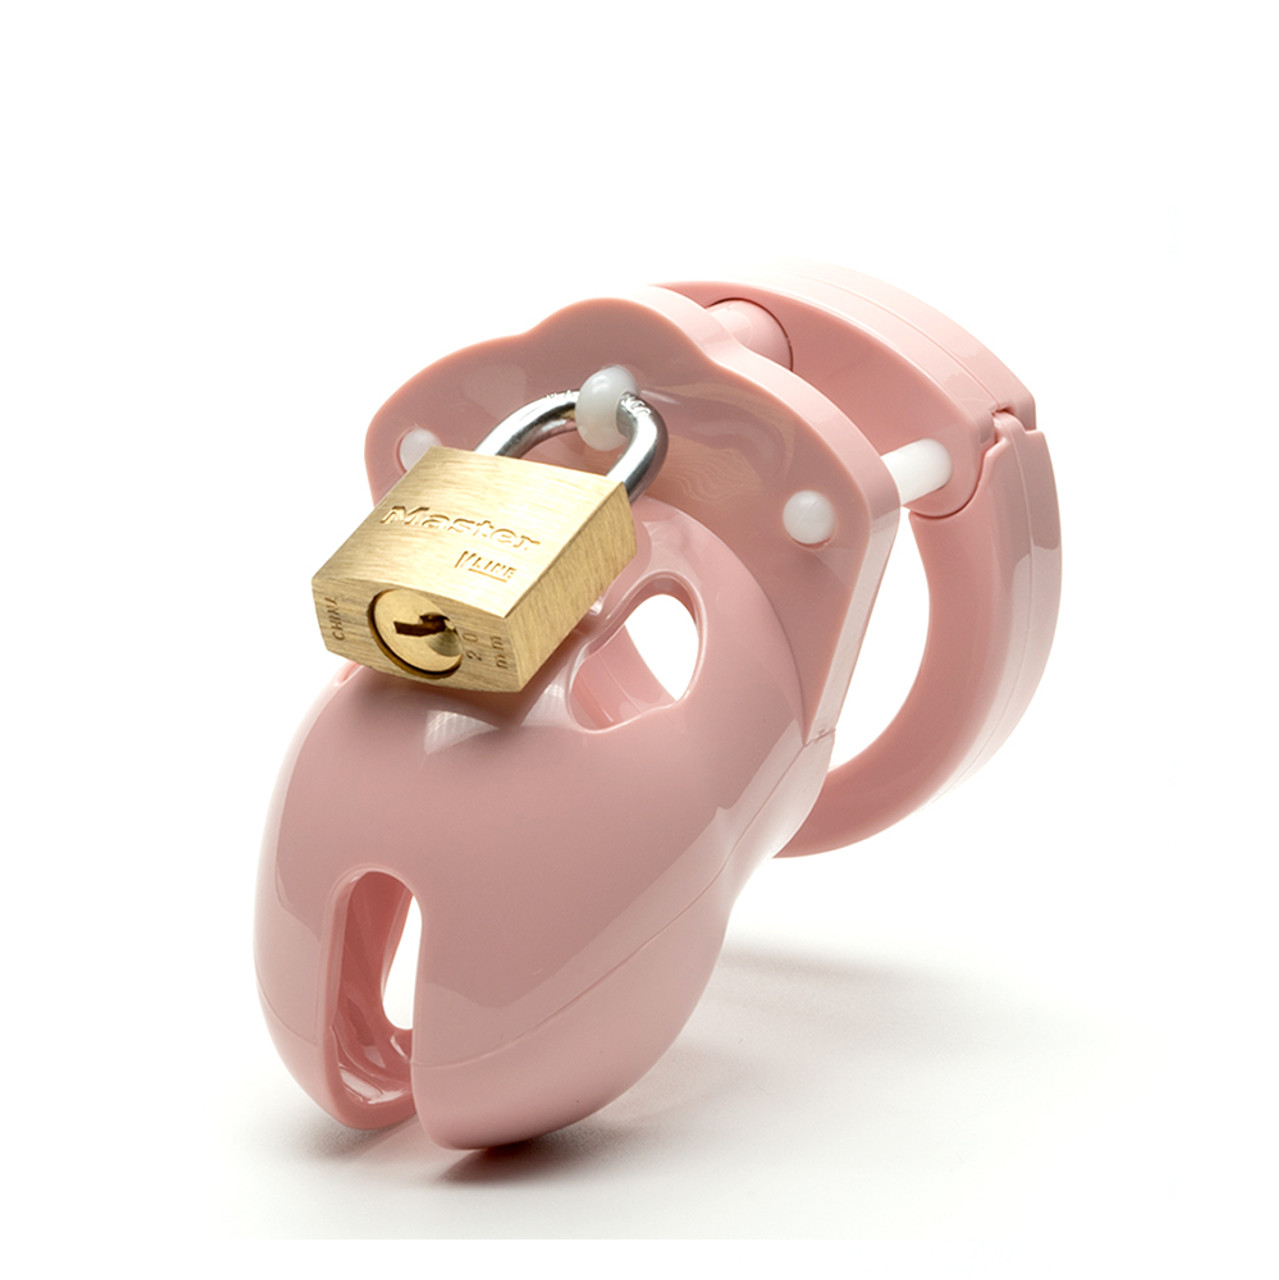 CB-X Mr Stubb Pink 1.75 inch Male Chastity Cock Cage Kit